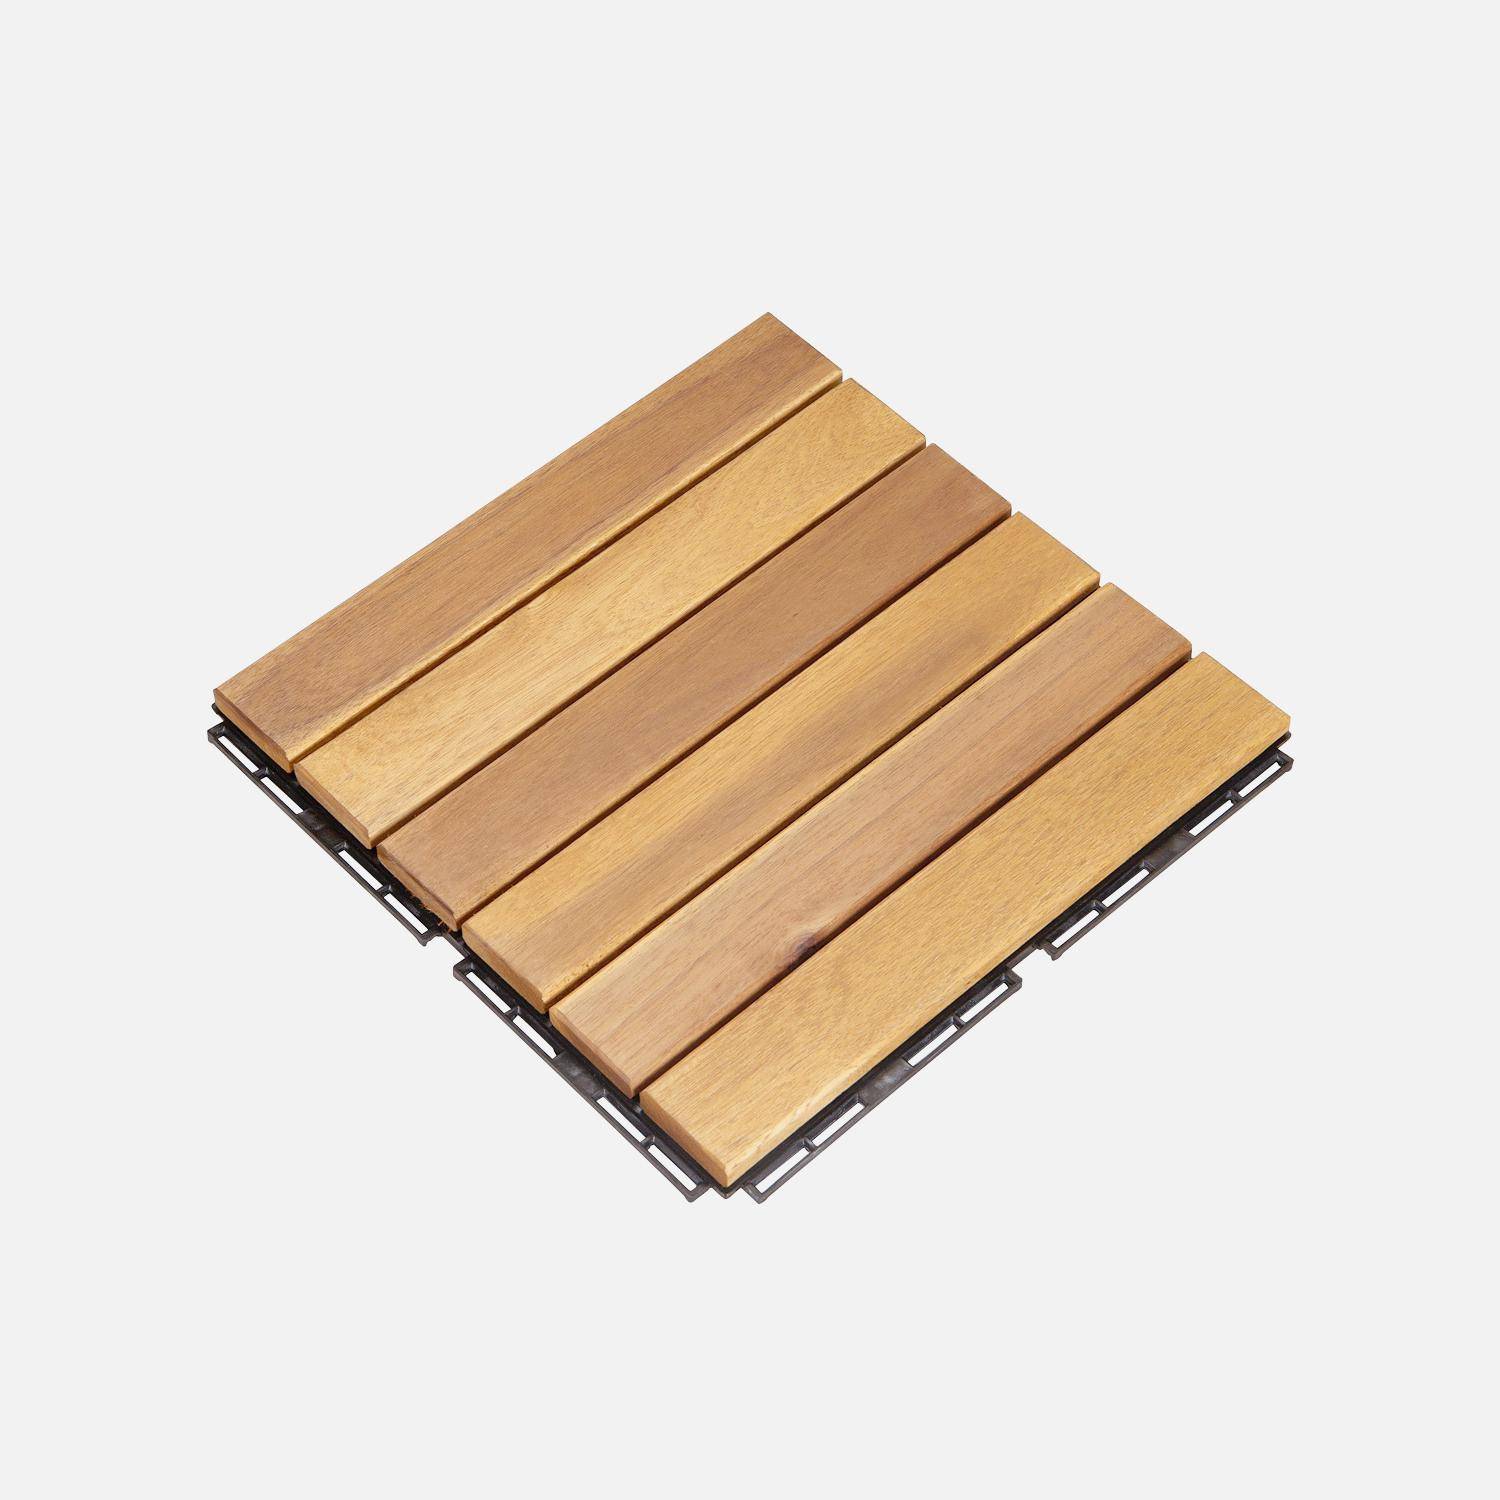 Batch of 36 acacia wood decking tiles 30x30cm, linear pattern, slatted, clip-on Photo2